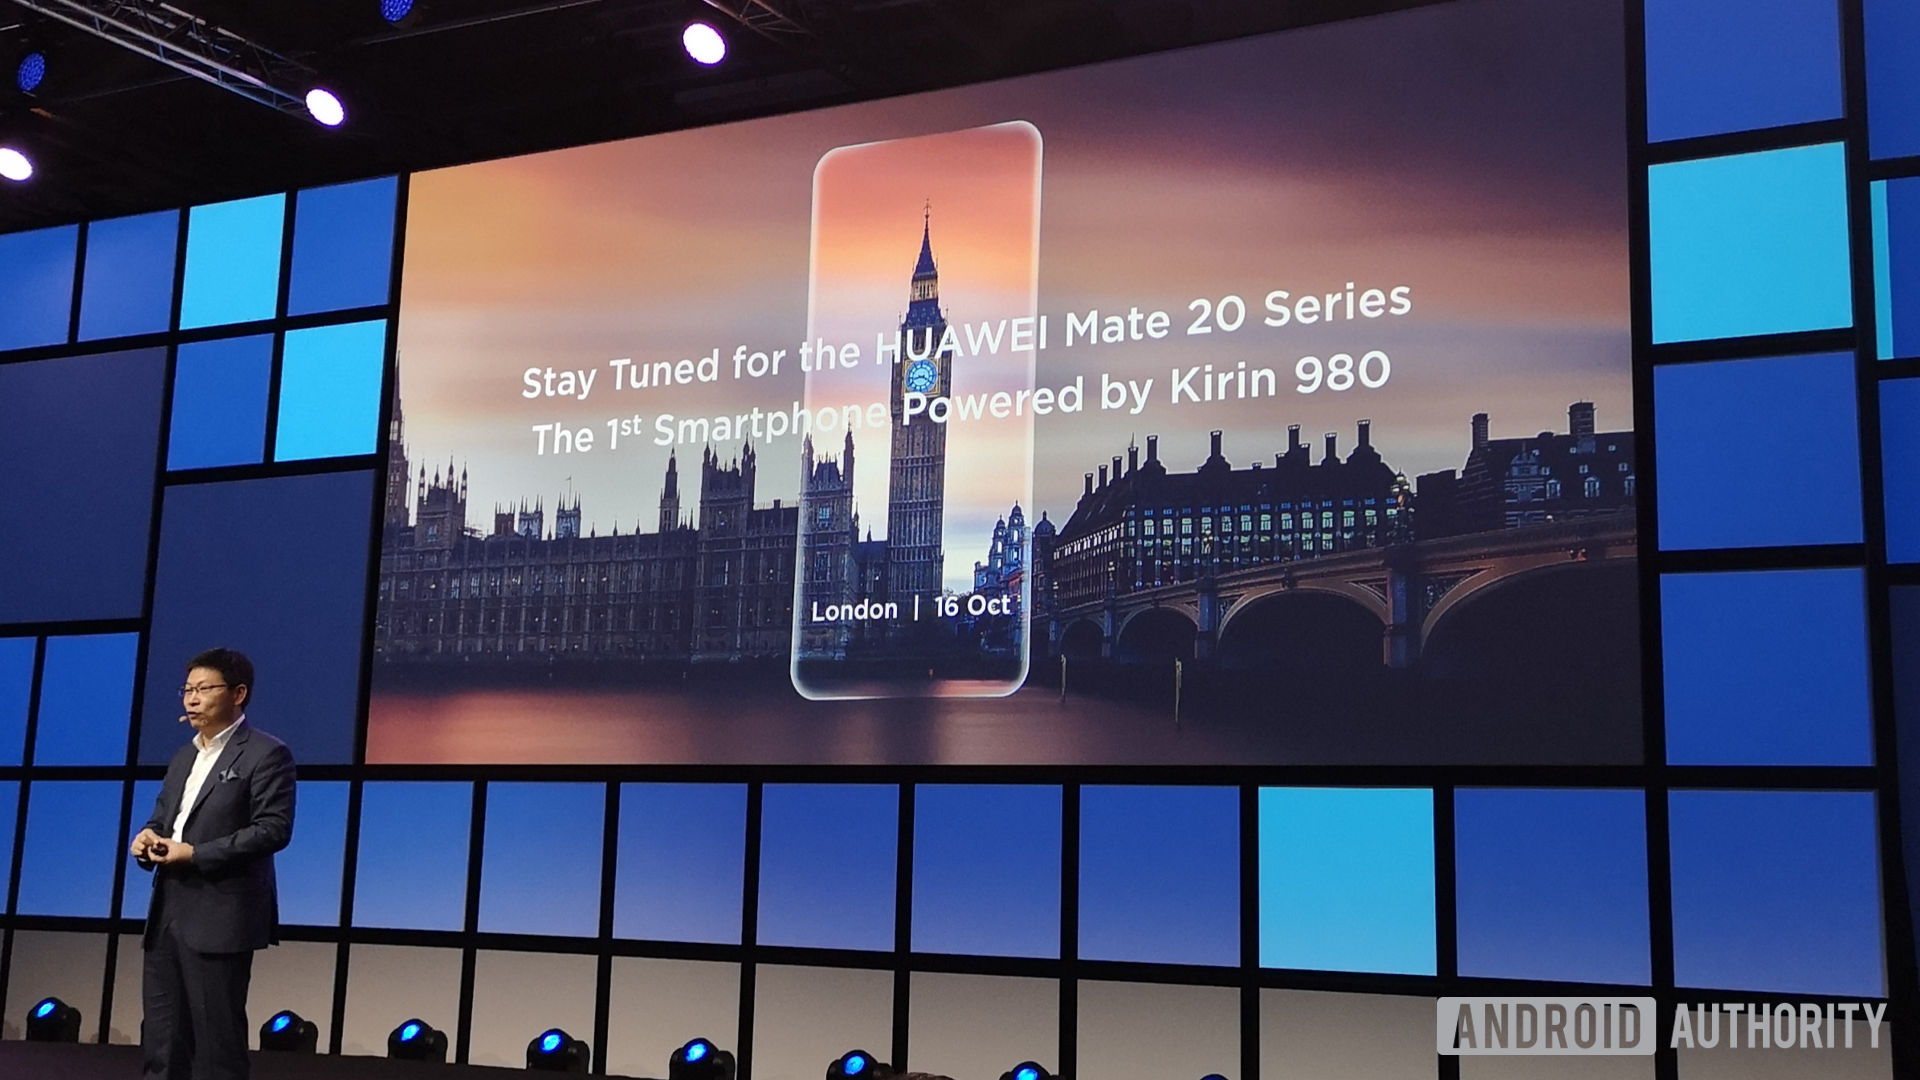 The HUAWEI Mate 20 launch date, as seen at IFA.